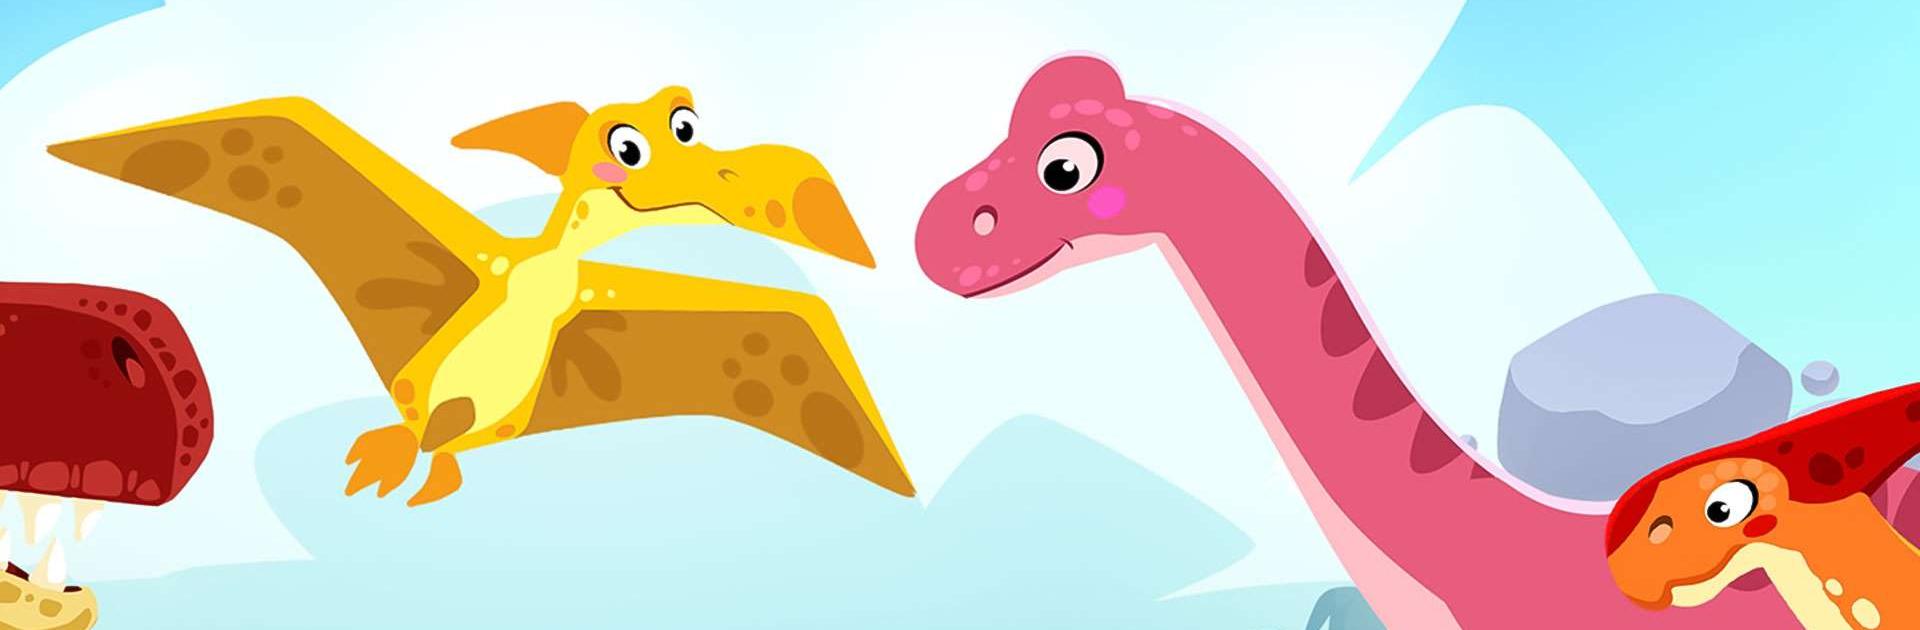 Download and play Dinosaur Games For Toddlers on PC & Mac (Emulator)